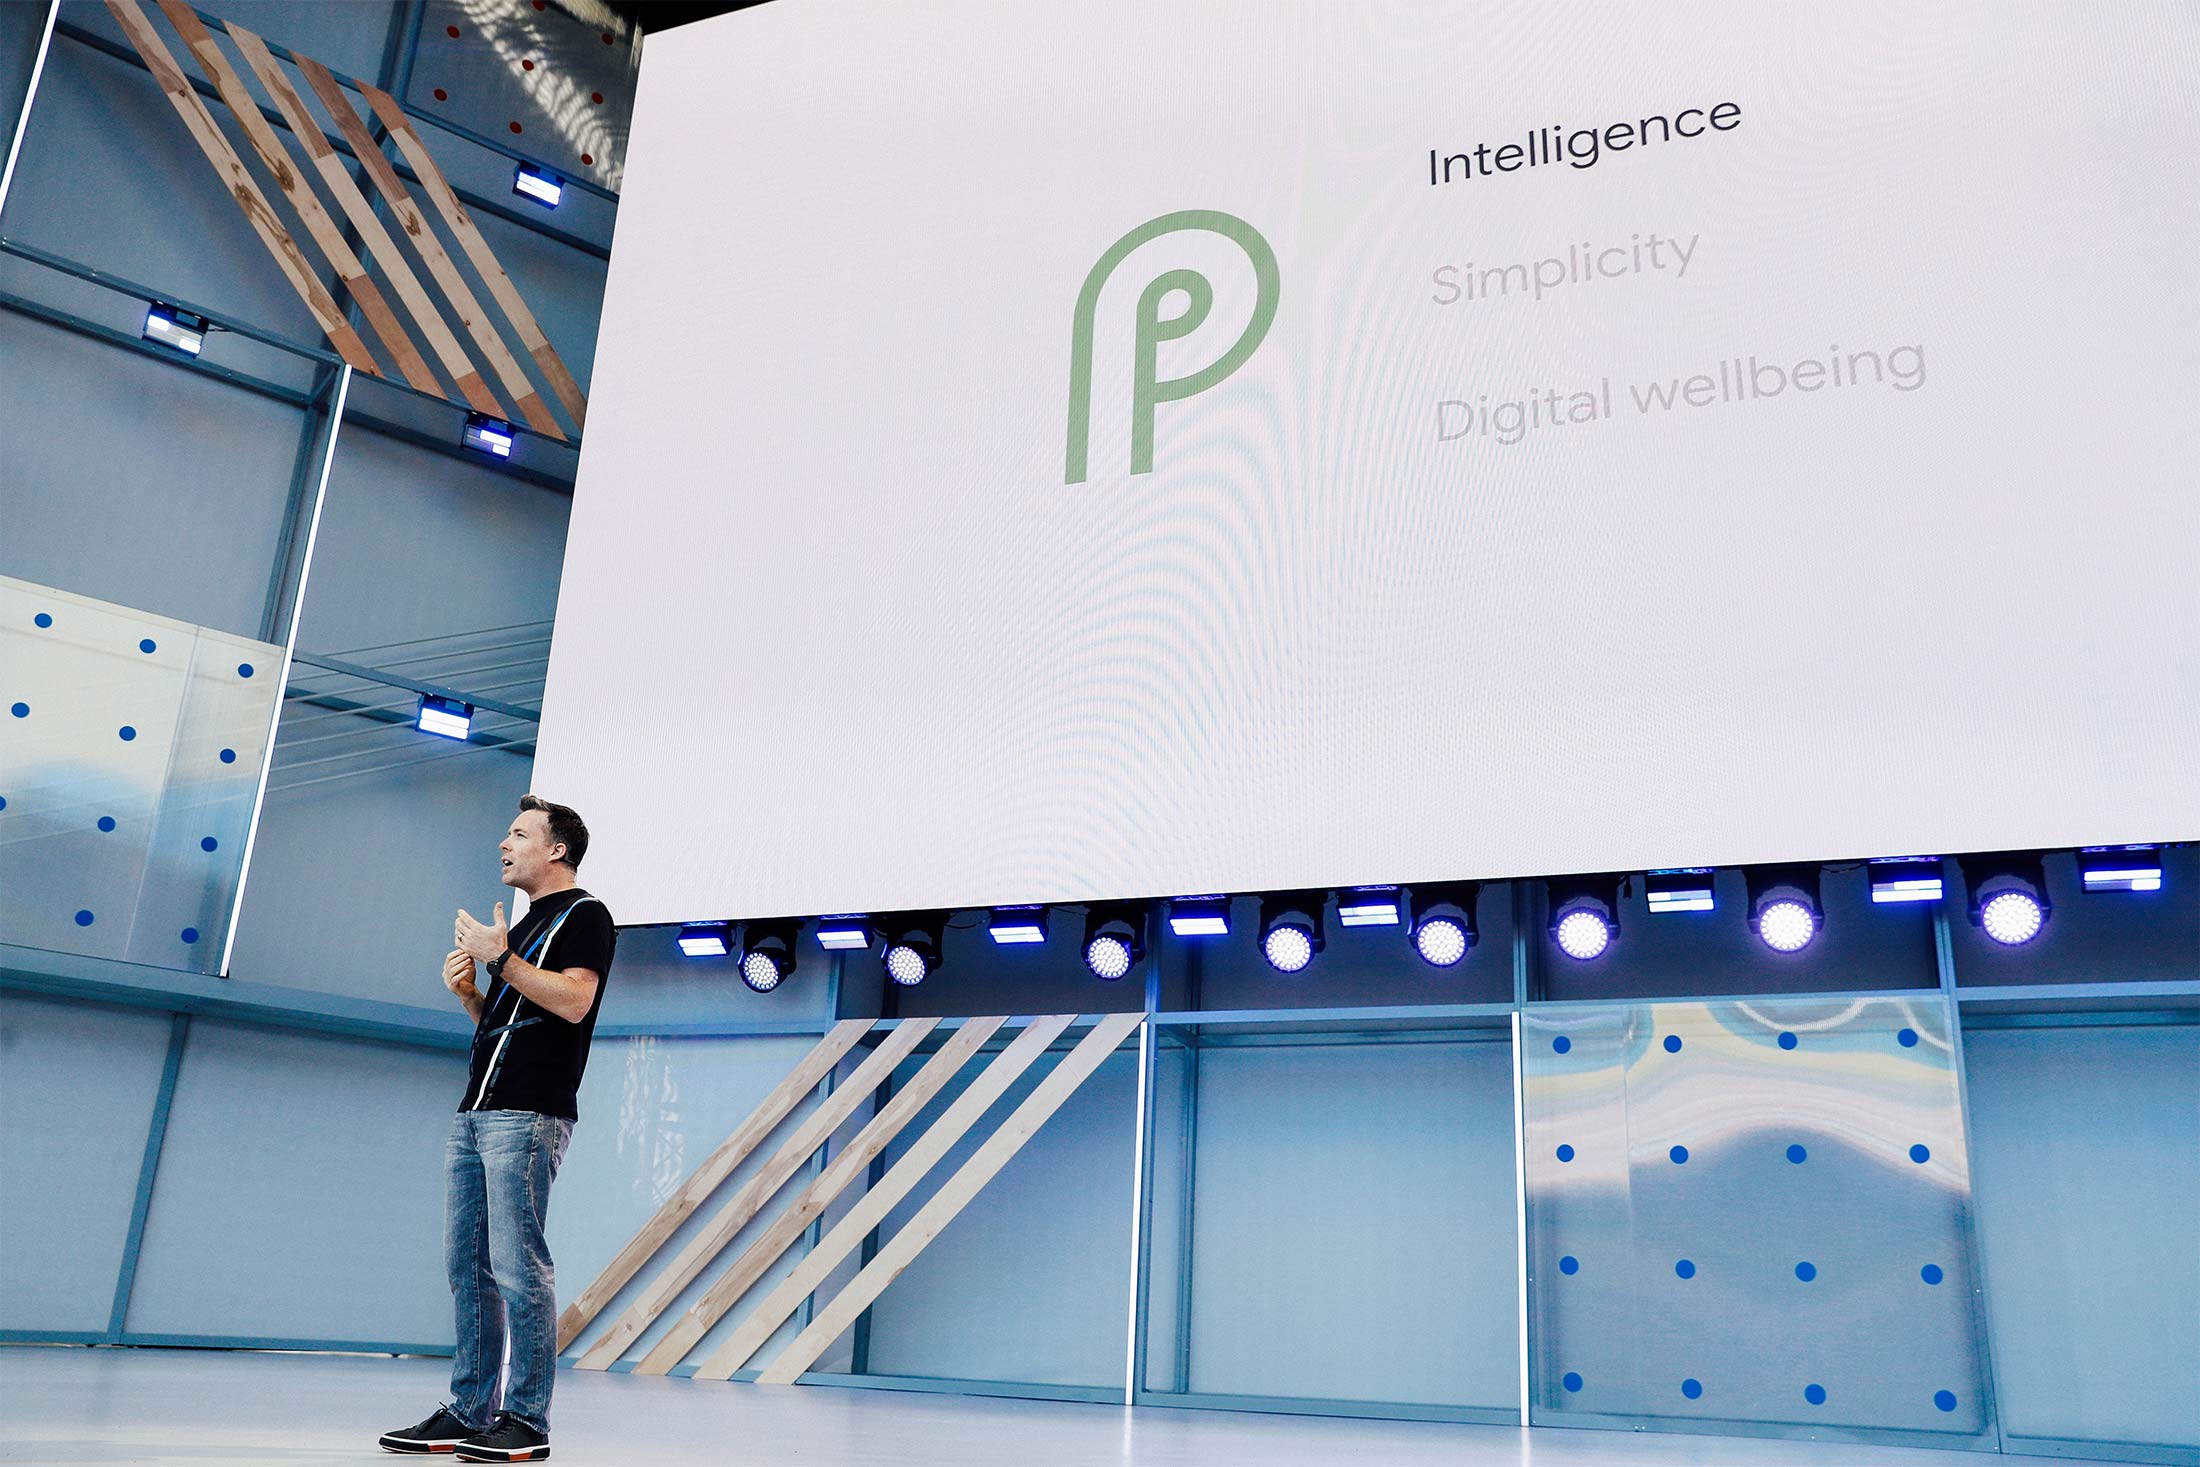 Dave Burke, Android vice president of engineering, speaks onstage during the annual Google I/O developers conference in Mountain View, California, on Tuesday.